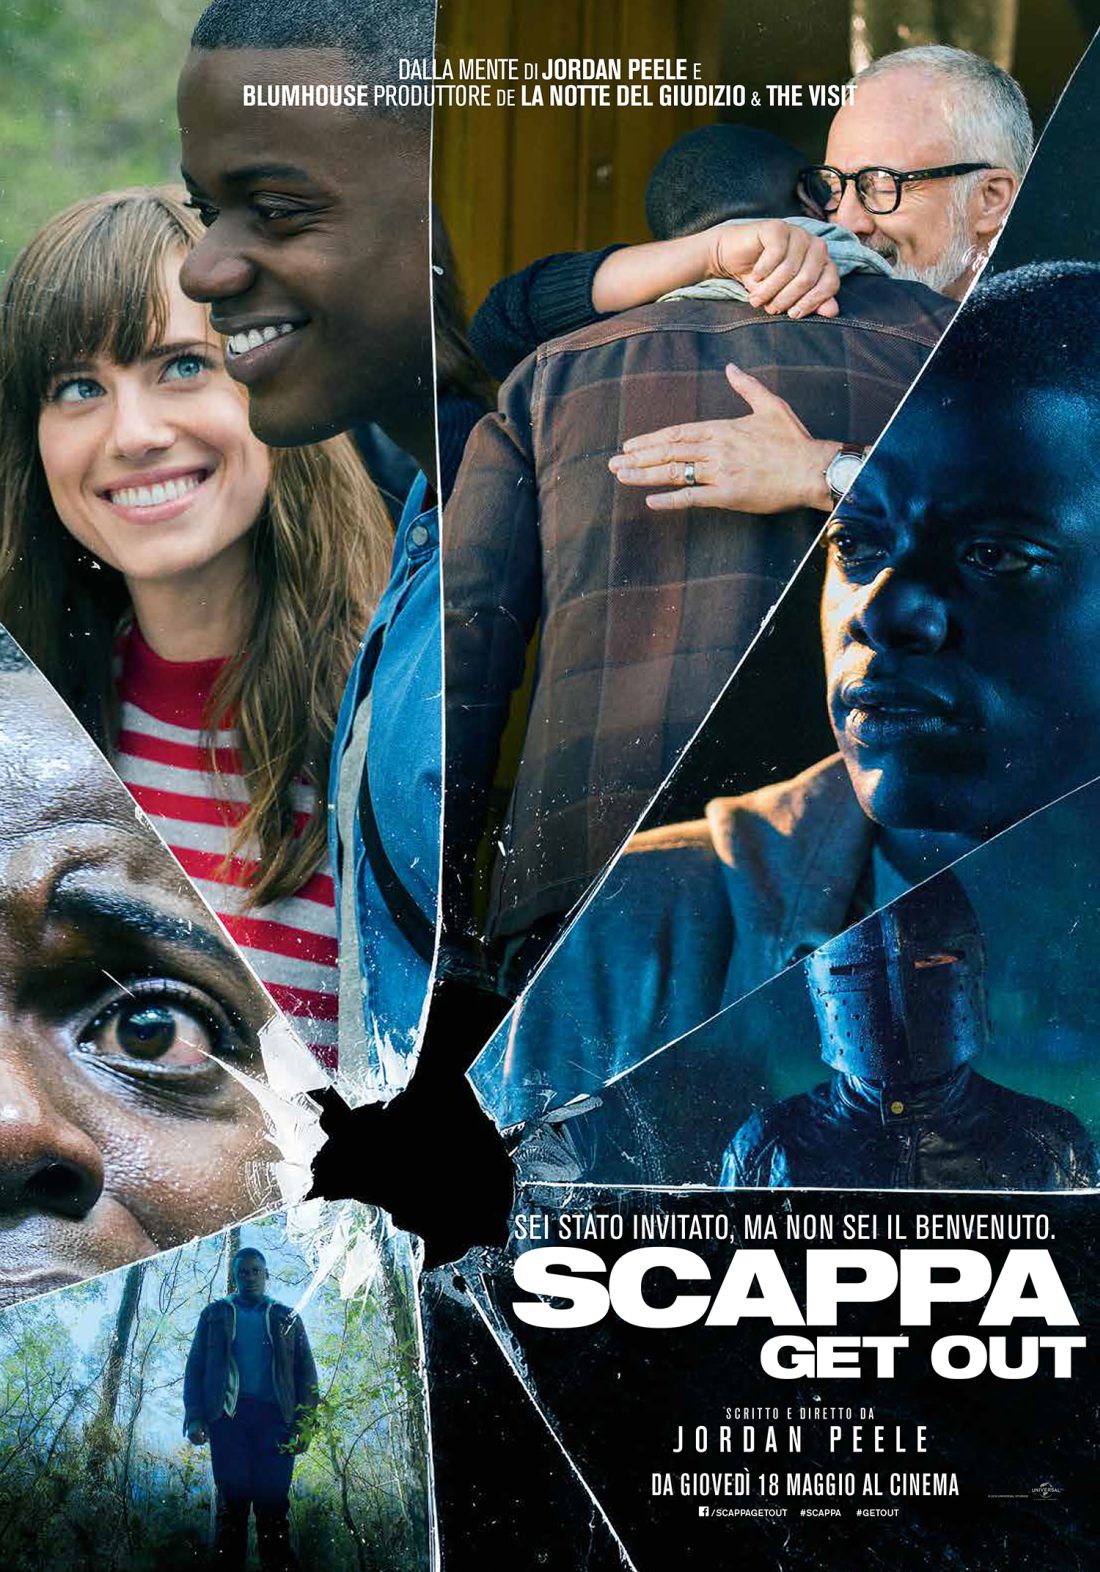 https://movieplayer.it/film/scappa-get-out_46426/